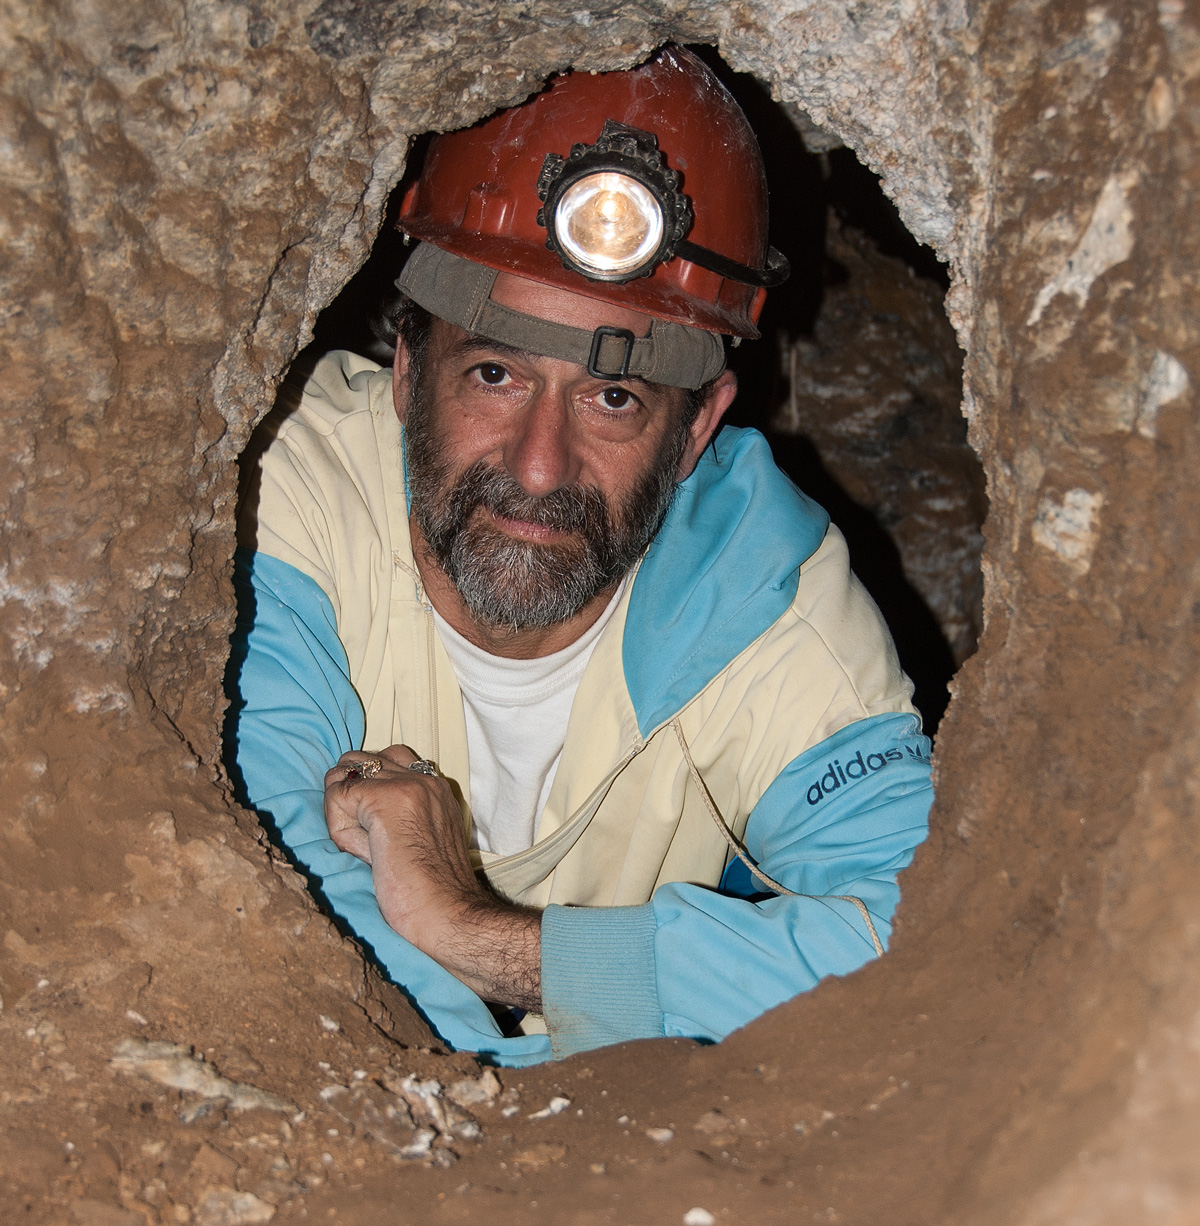 Dana Schorr in the ancient galleries at Tajikistan's Kuh-i-Lal spinel mines. Click on the image for a larger view. Author's photo, 2006